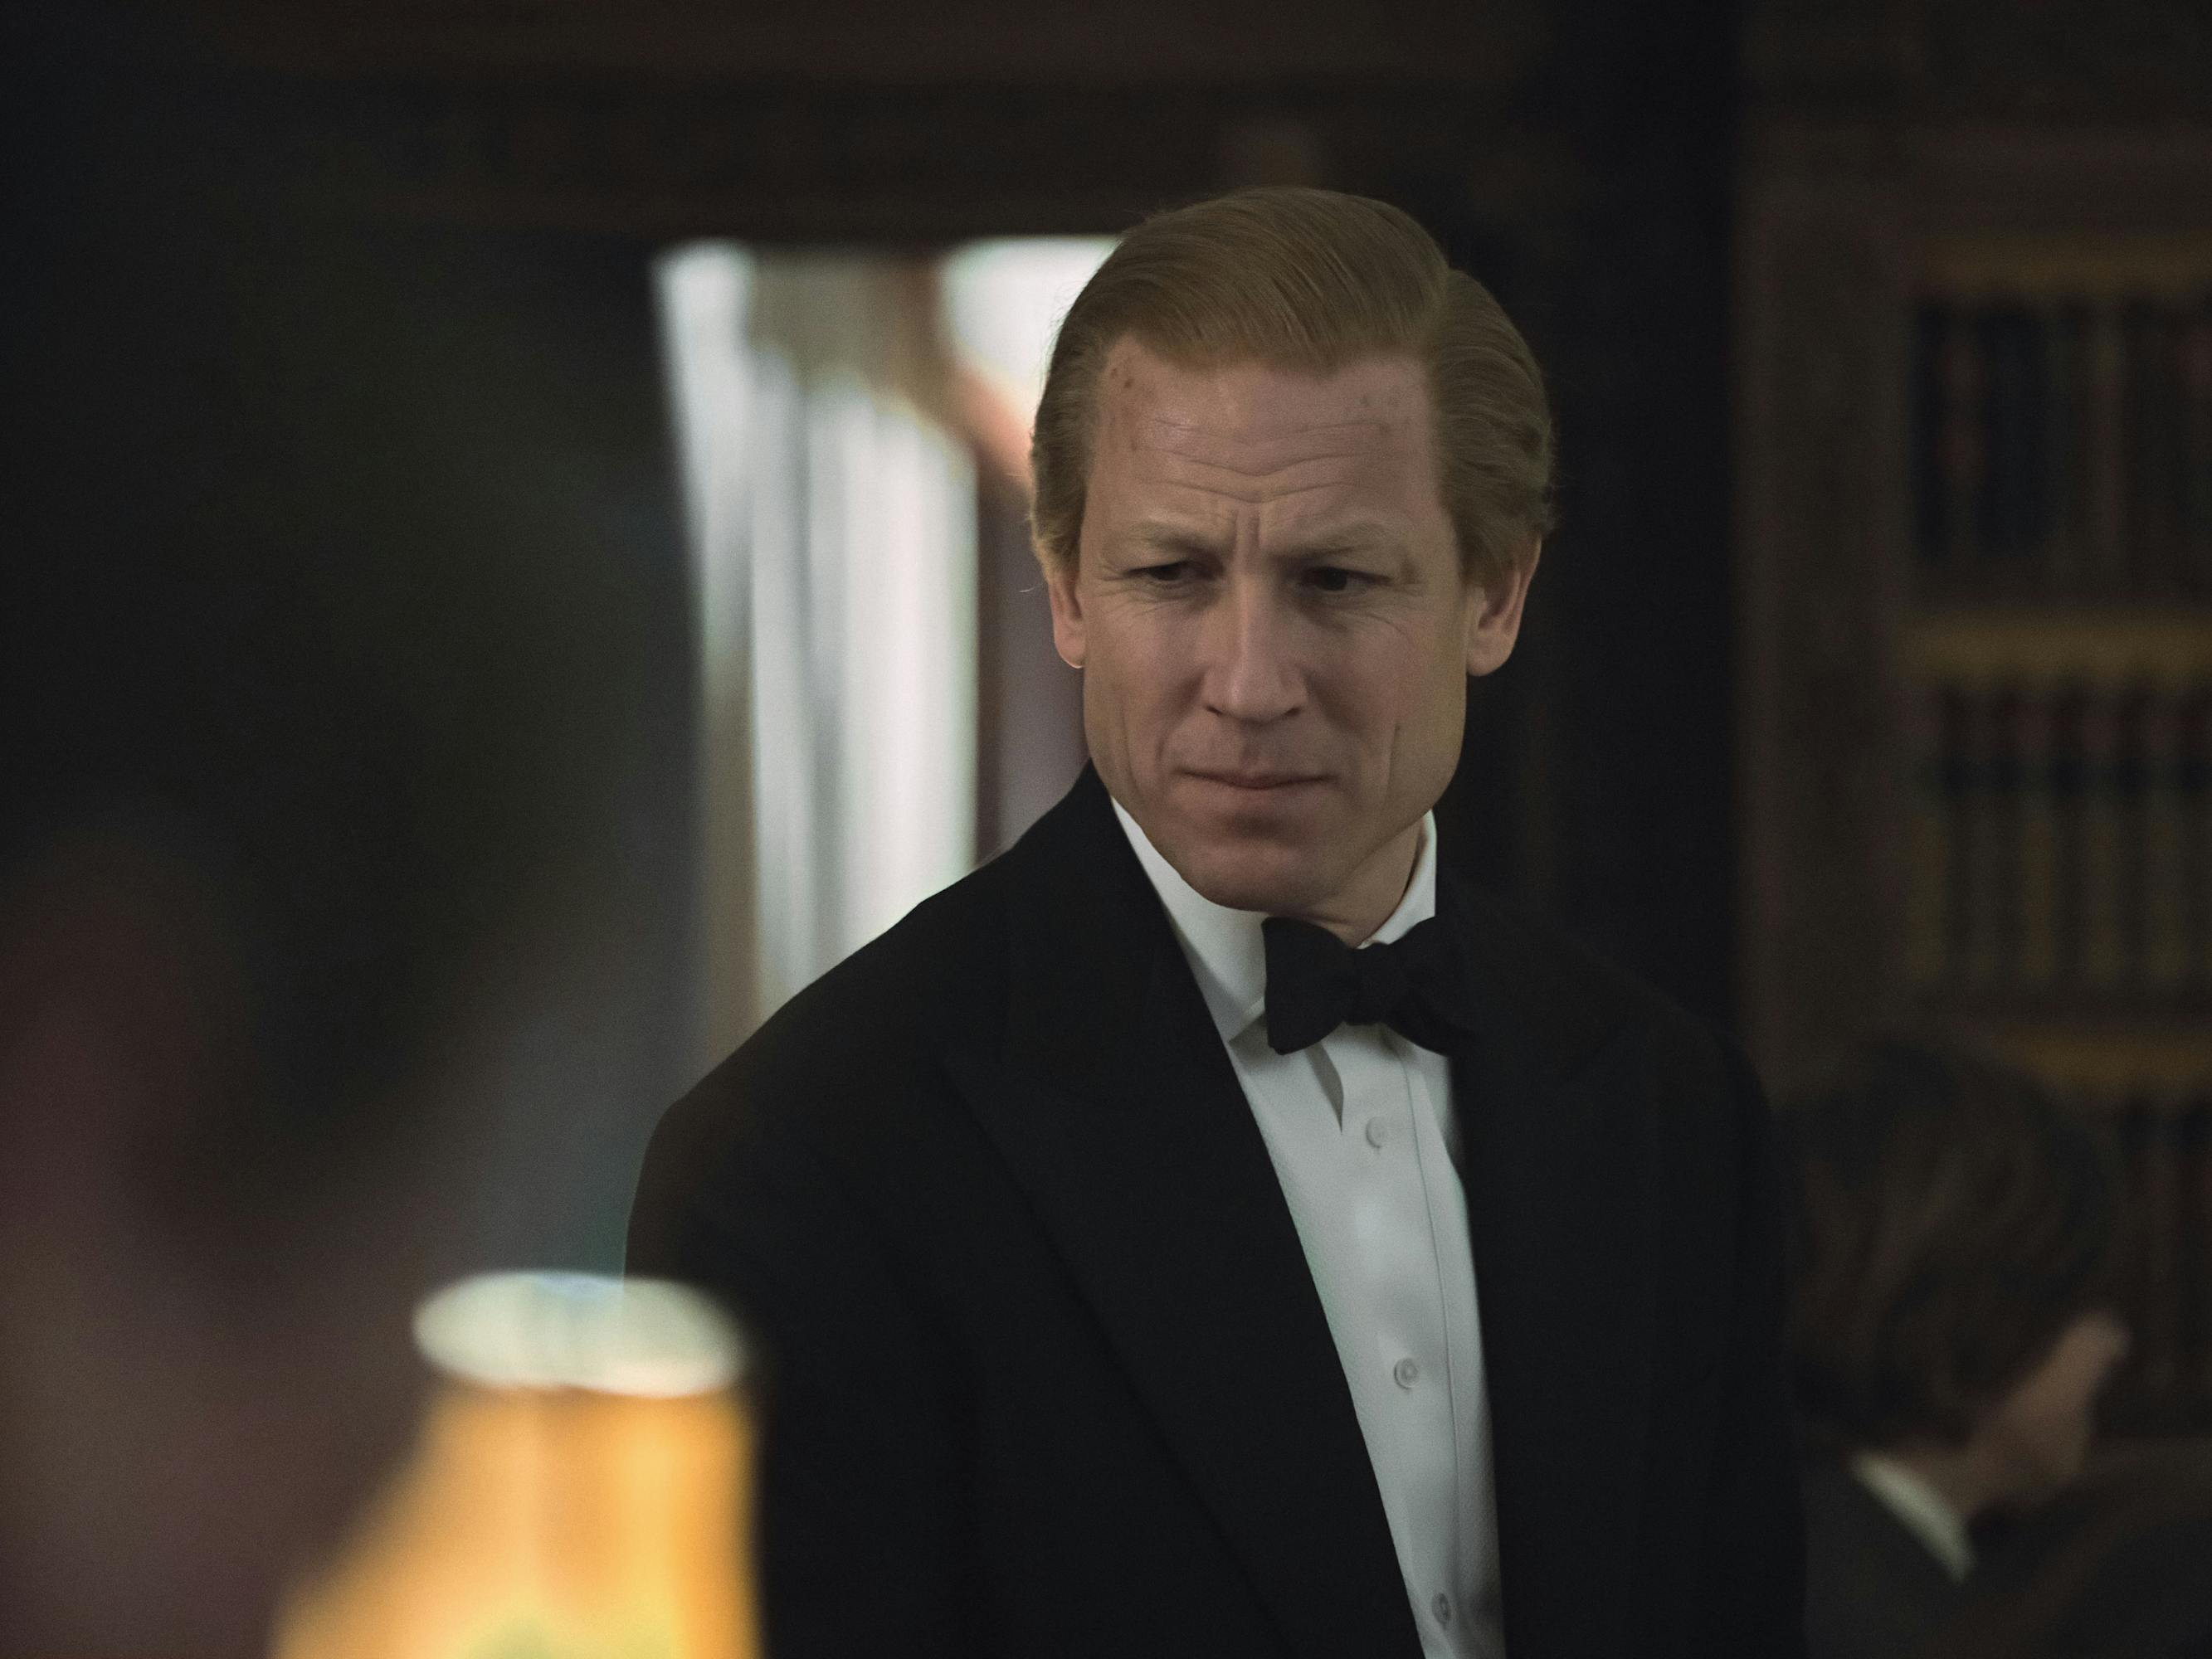 Prince Philip (Tobias Menzies) looks dapper in a bowtie and suit.